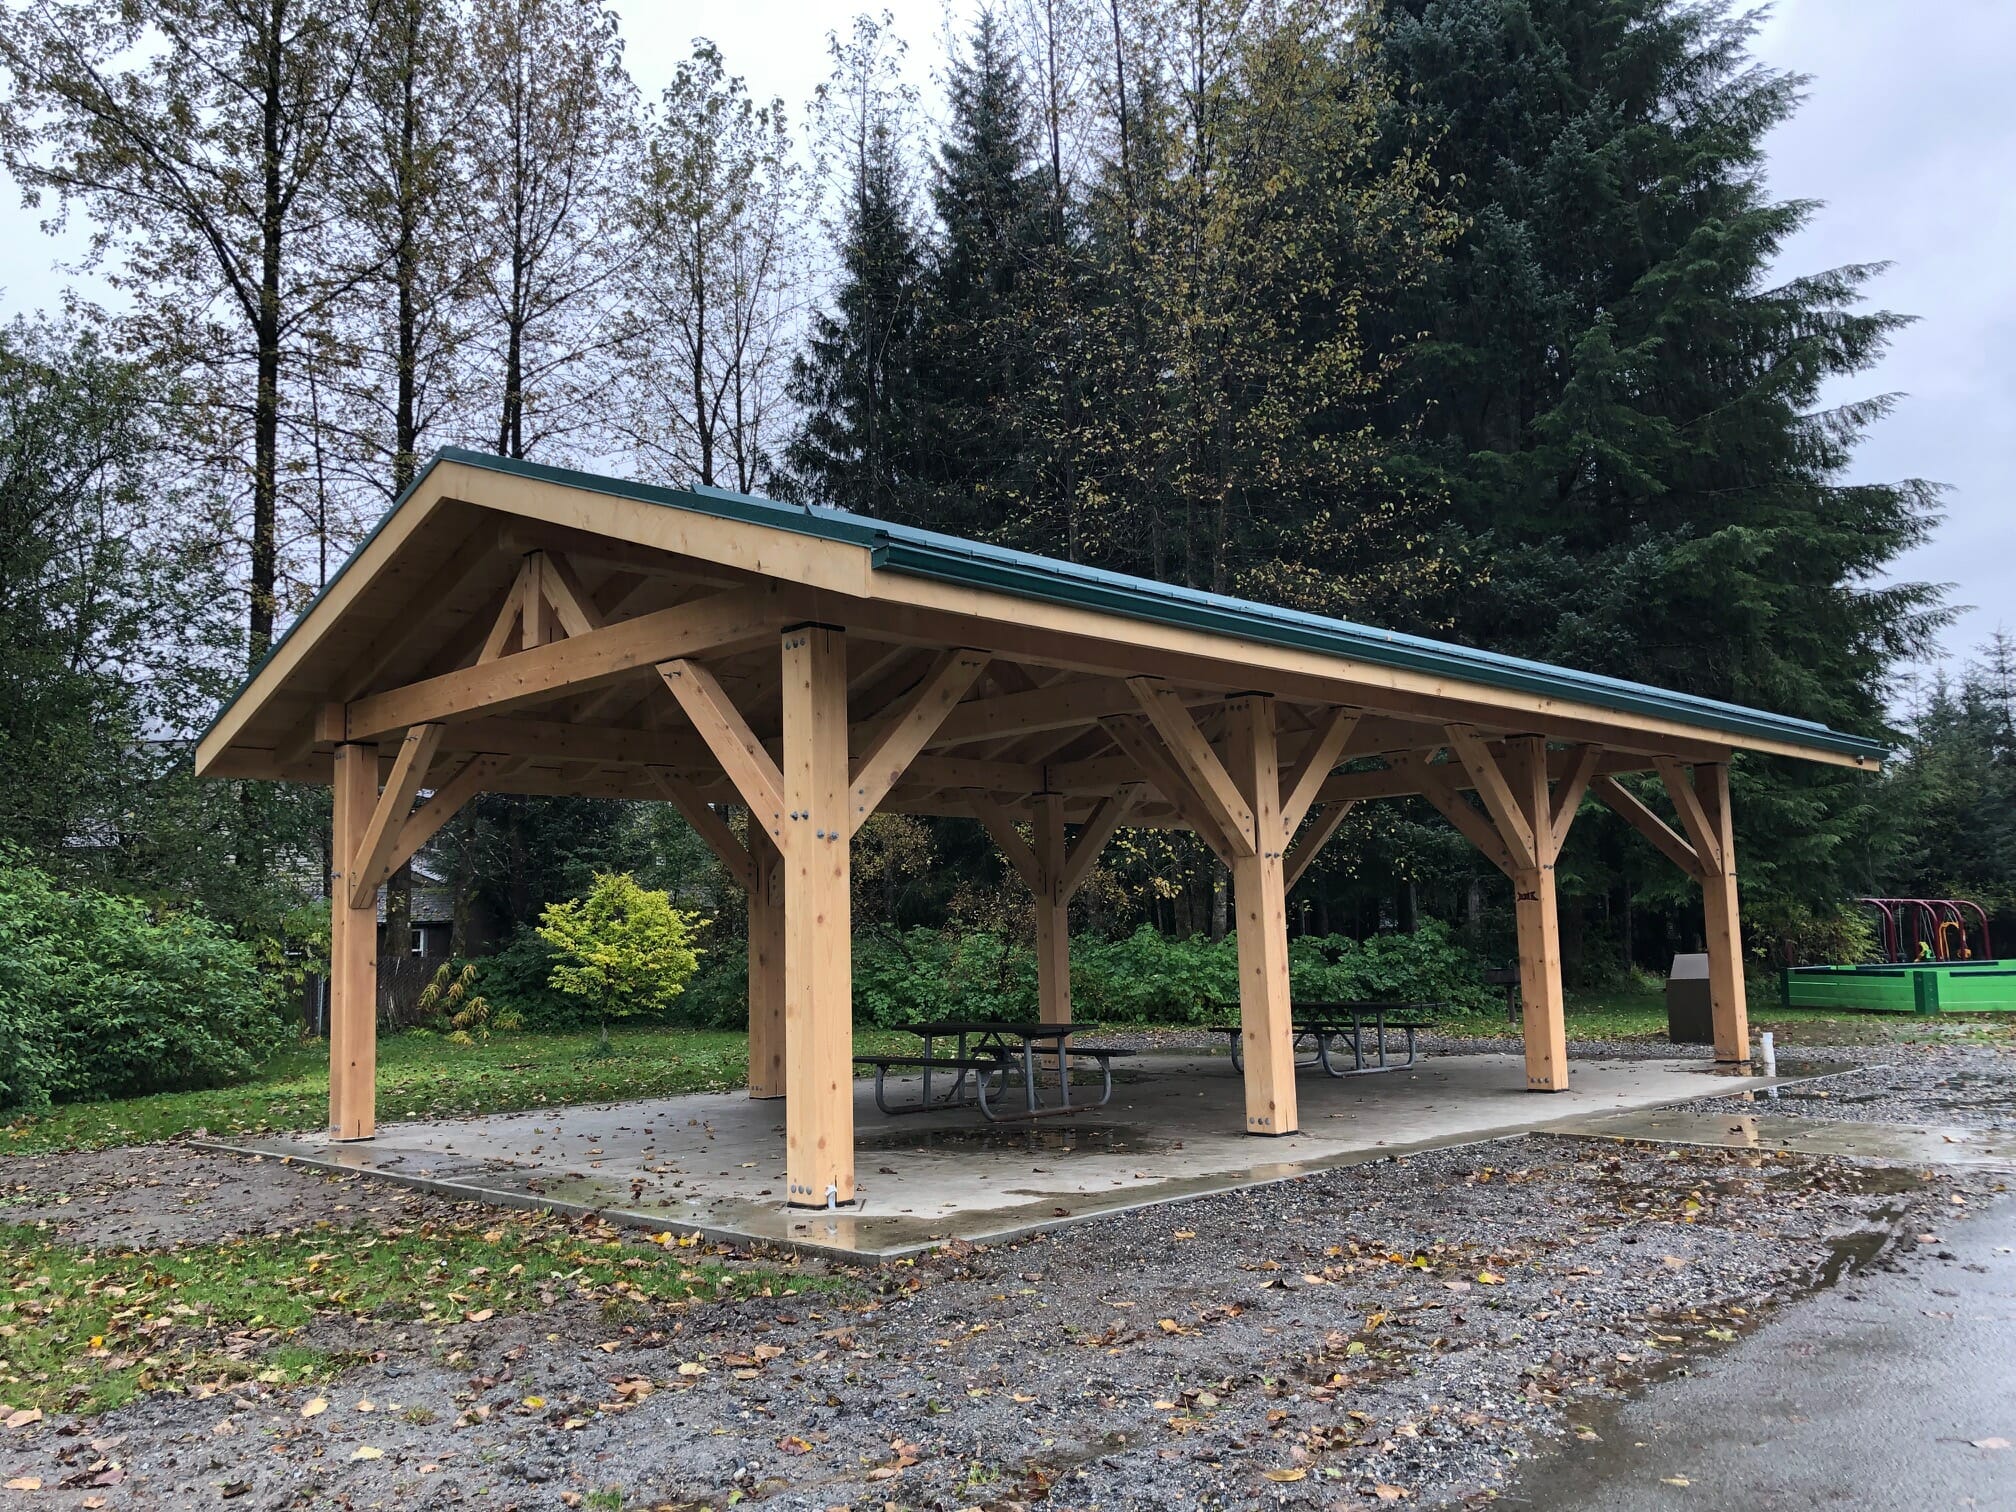 The new shelter at Riverside Rotary Park.